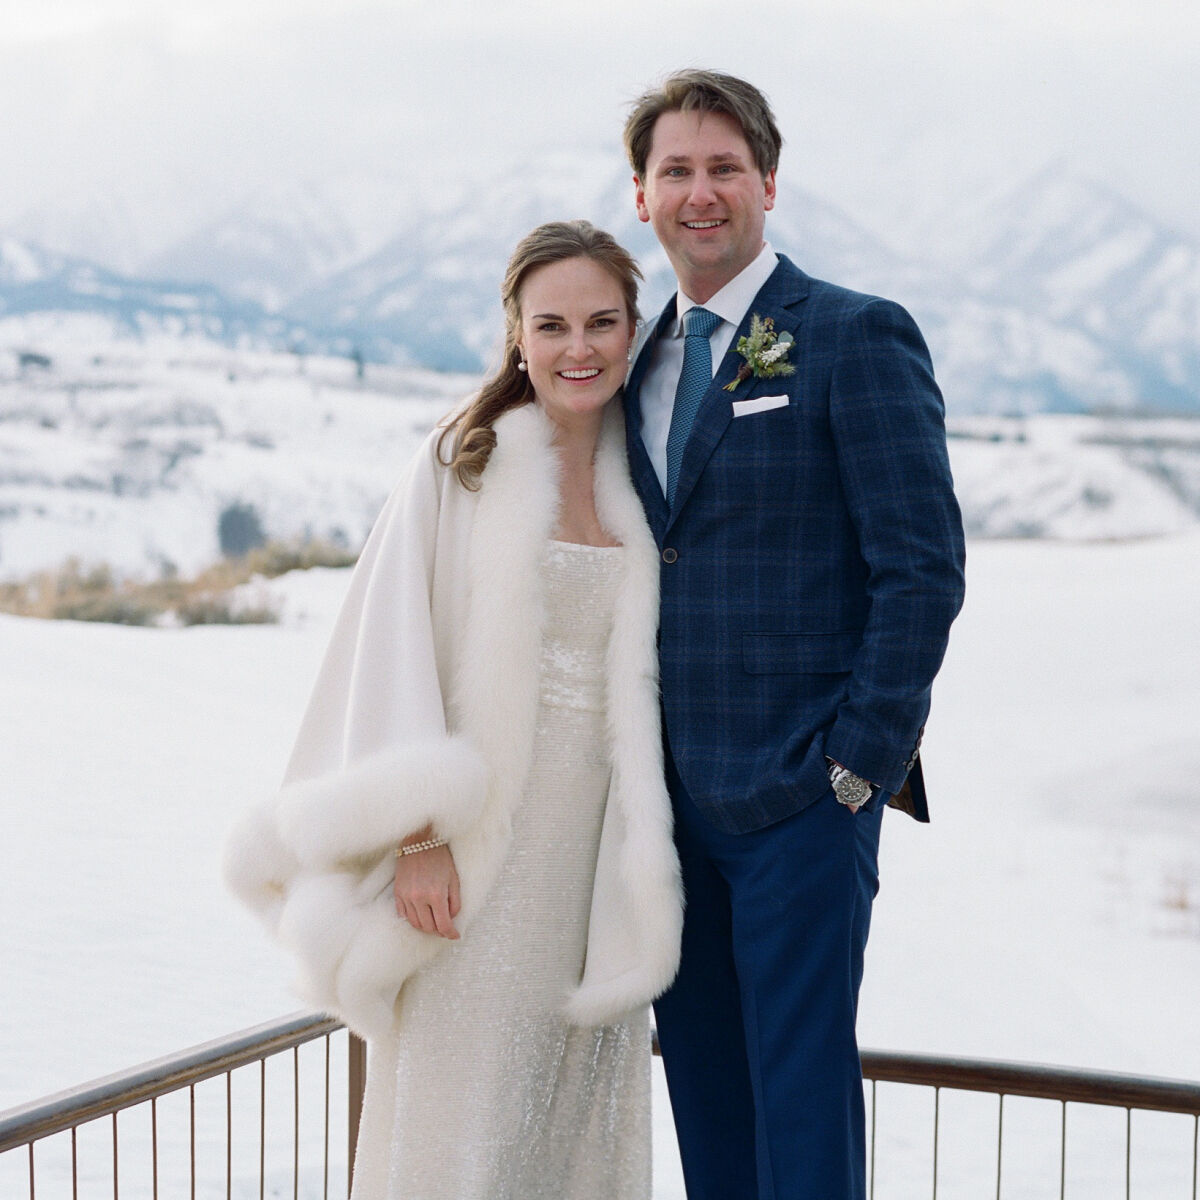 Winter wedding details: A couple pose in front of the mountains at their winter micro wedding at Amangani in Jackson, Wyoming